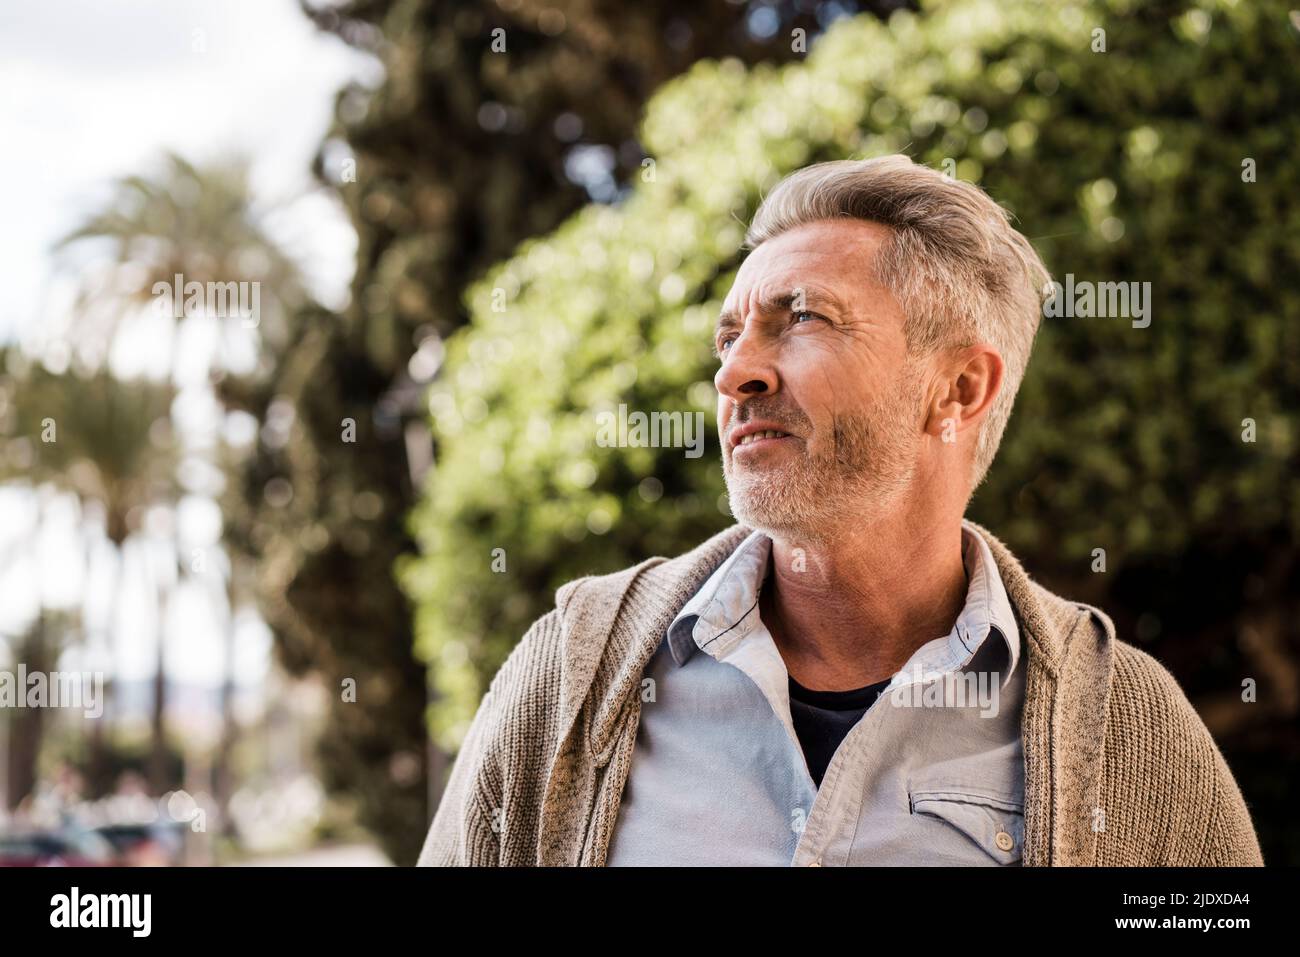 Thoughtful mature man in park Stock Photo